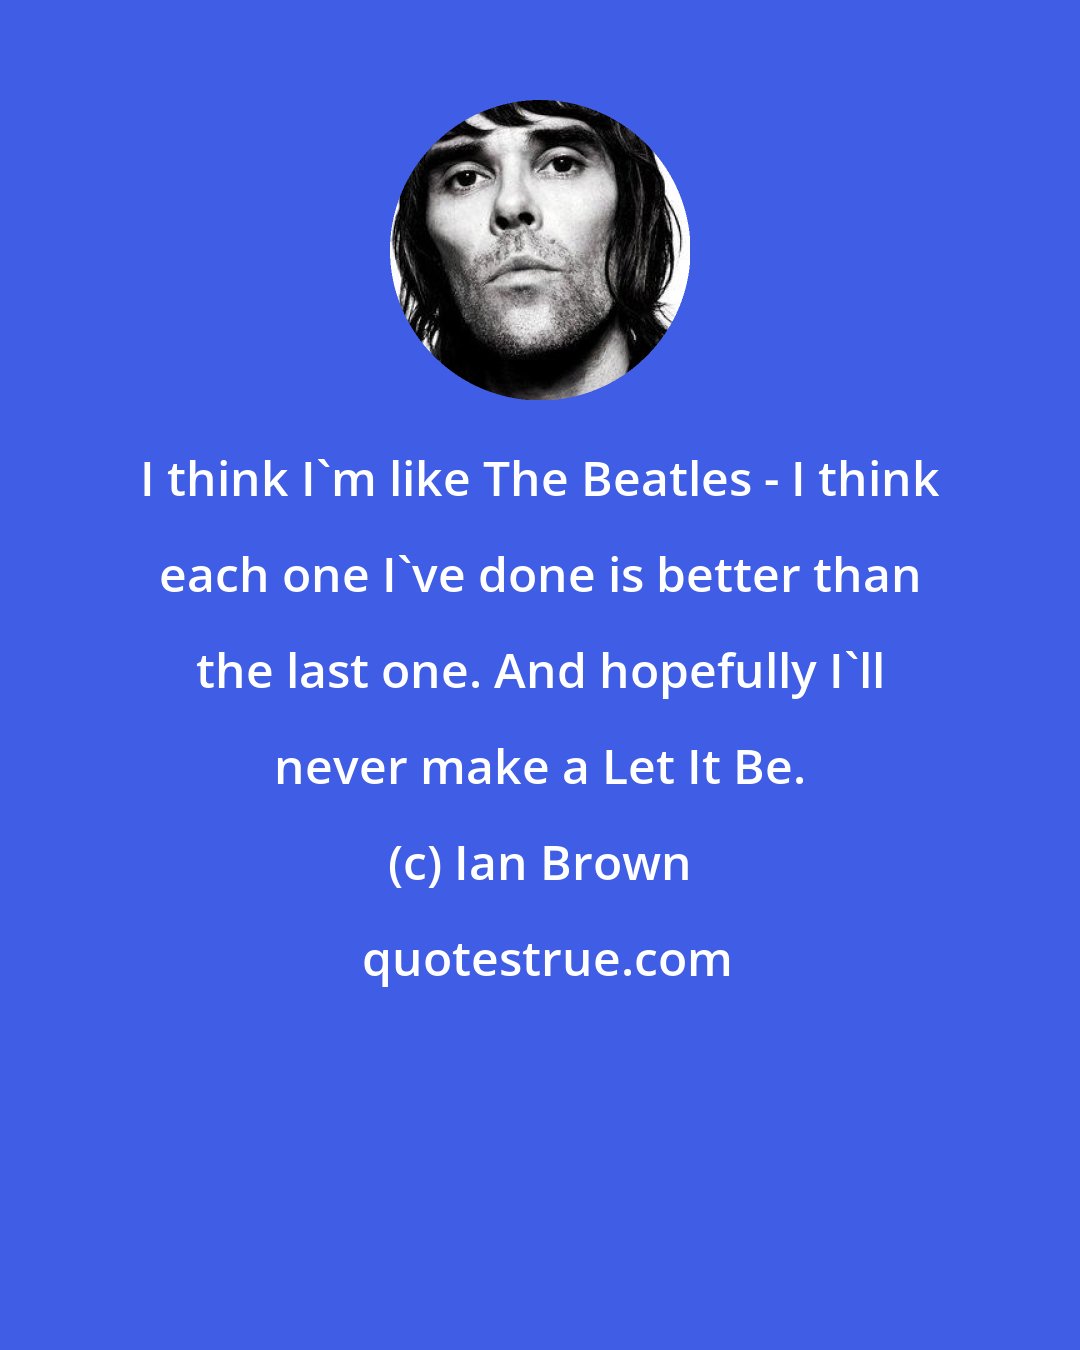 Ian Brown: I think I'm like The Beatles - I think each one I've done is better than the last one. And hopefully I'll never make a Let It Be.